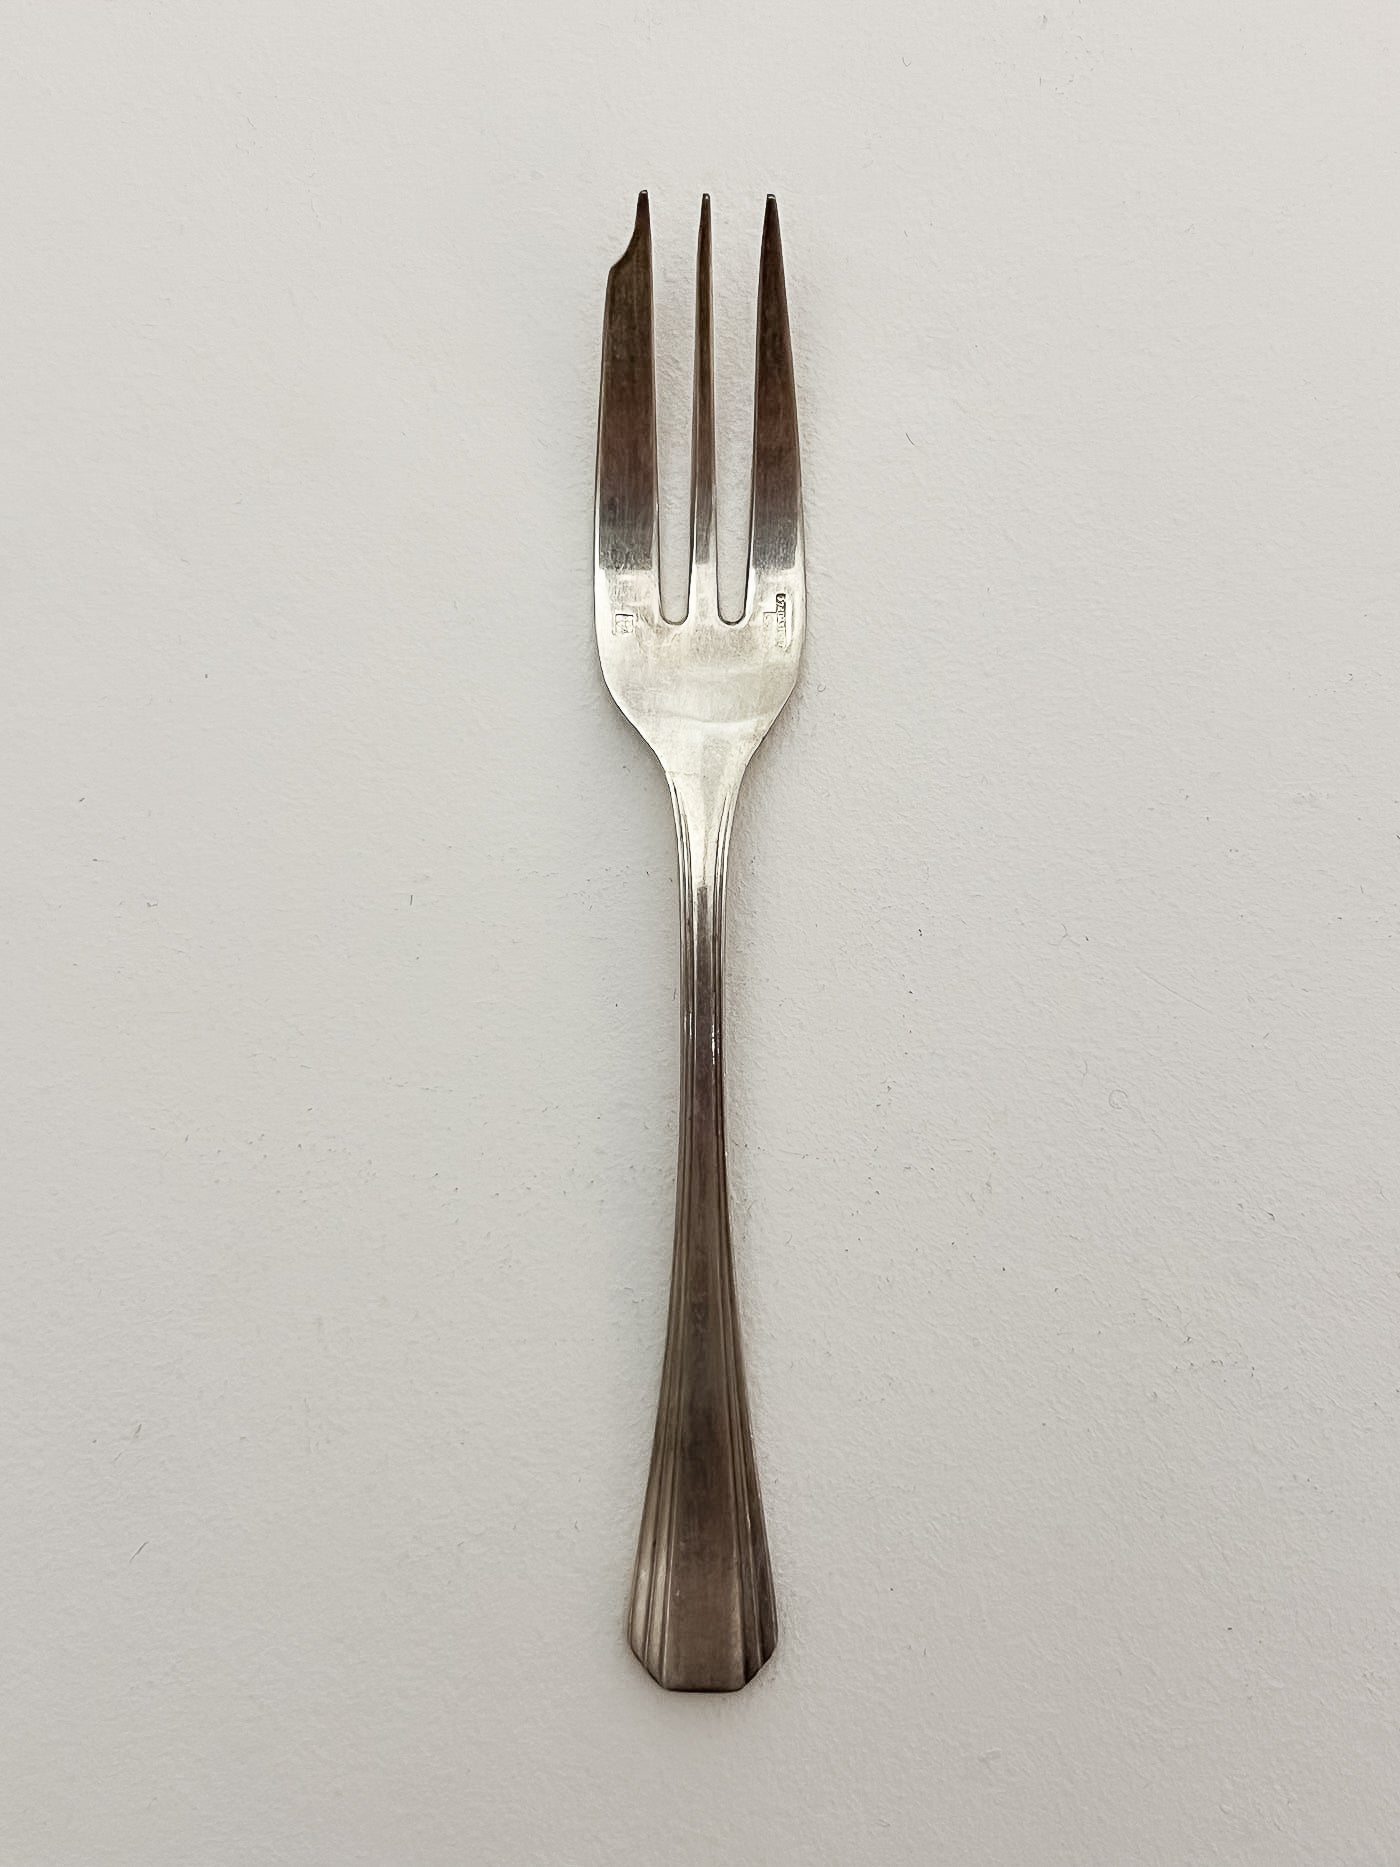 Christofle oyster forks 12 pieces